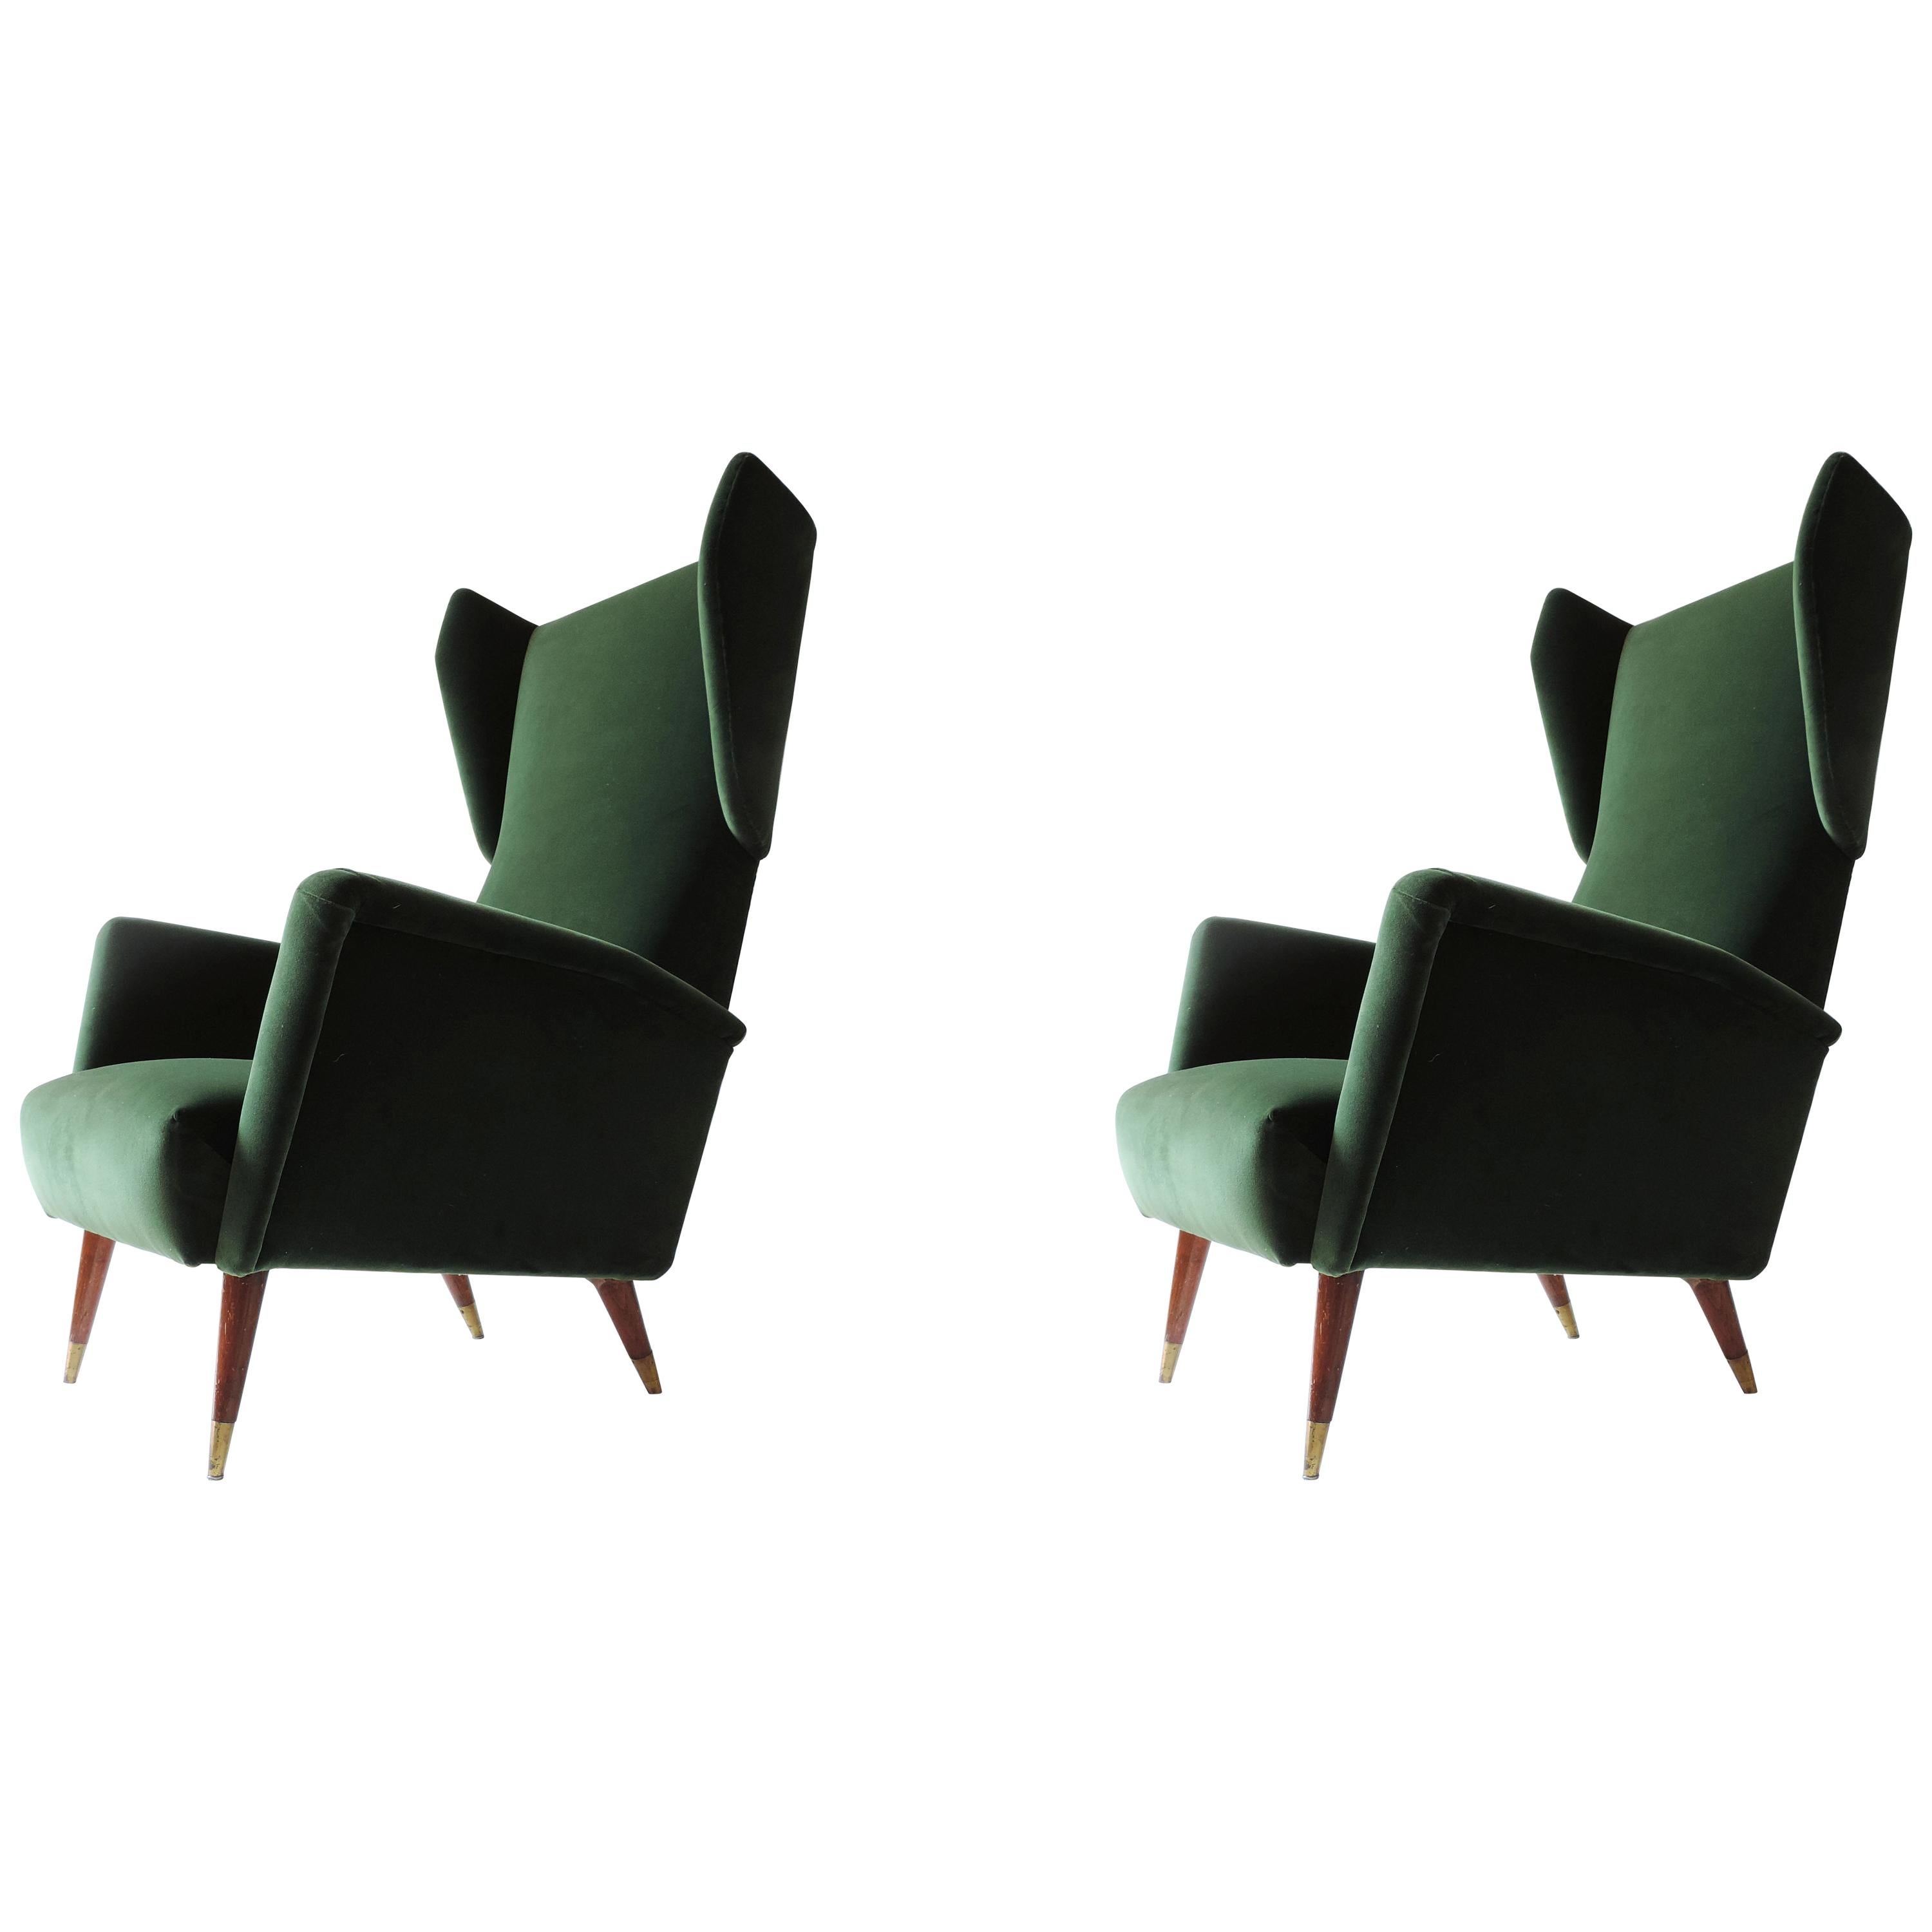 Gio Ponti Mod. 820 Armchairs for Cassina, Italy, 1953